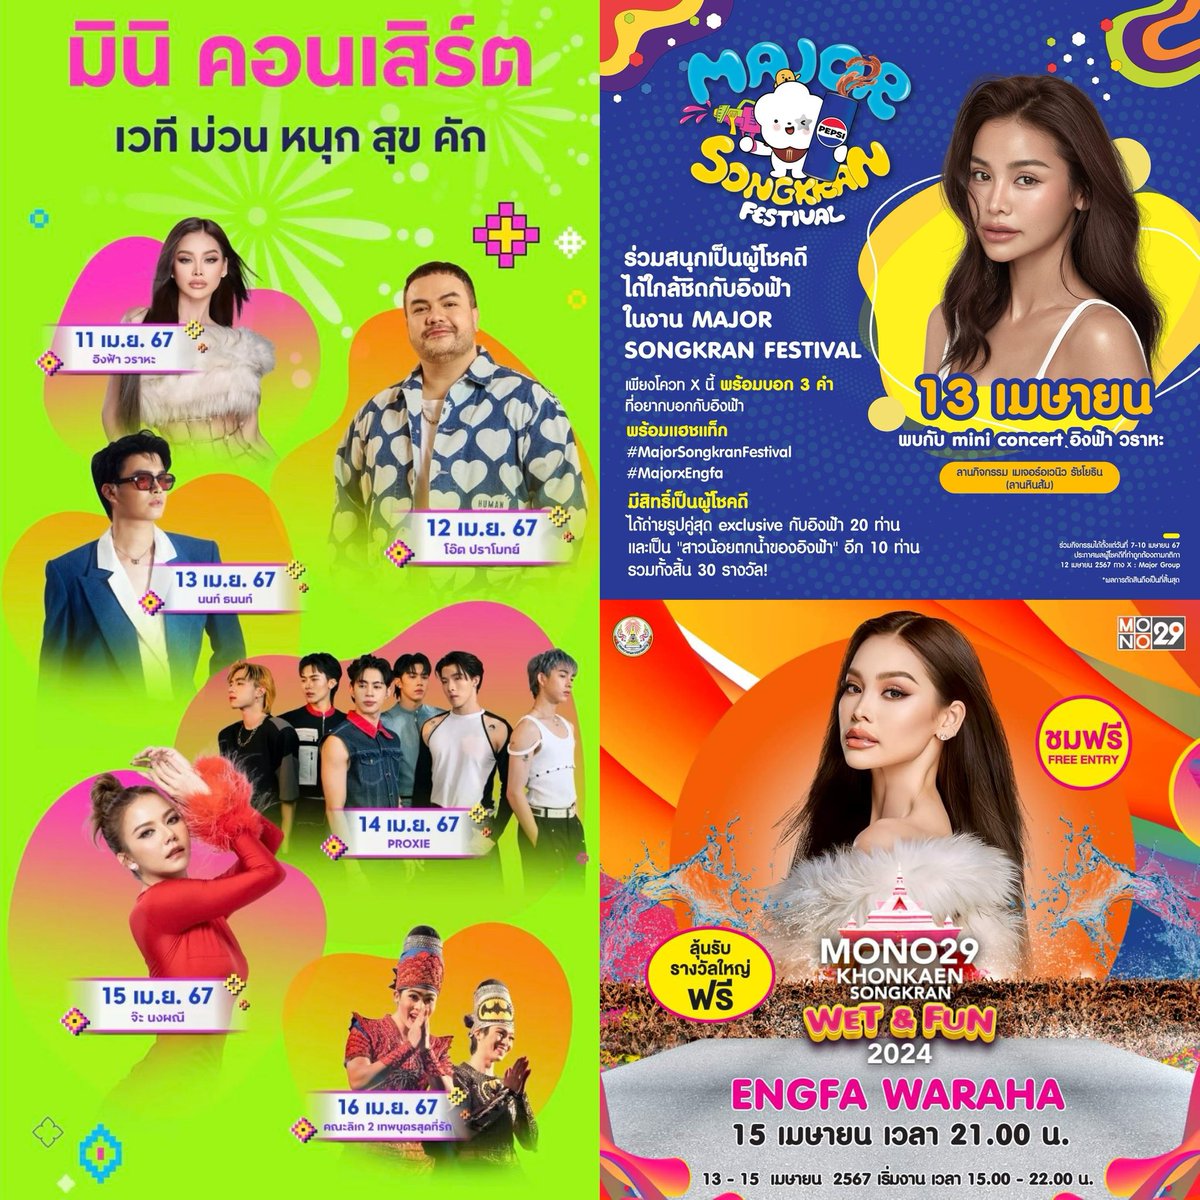 4 big brands - KingPower/MajorGroup/Pepsi/Mono with 3 events.

This year SongKran, Engfa and Swai Fishes got the best happiness 😭

#ENGFAxMajorSongkranFestival
#MajorSongkranFestival 
#อิงฟ้ามหาชน @EWaraha